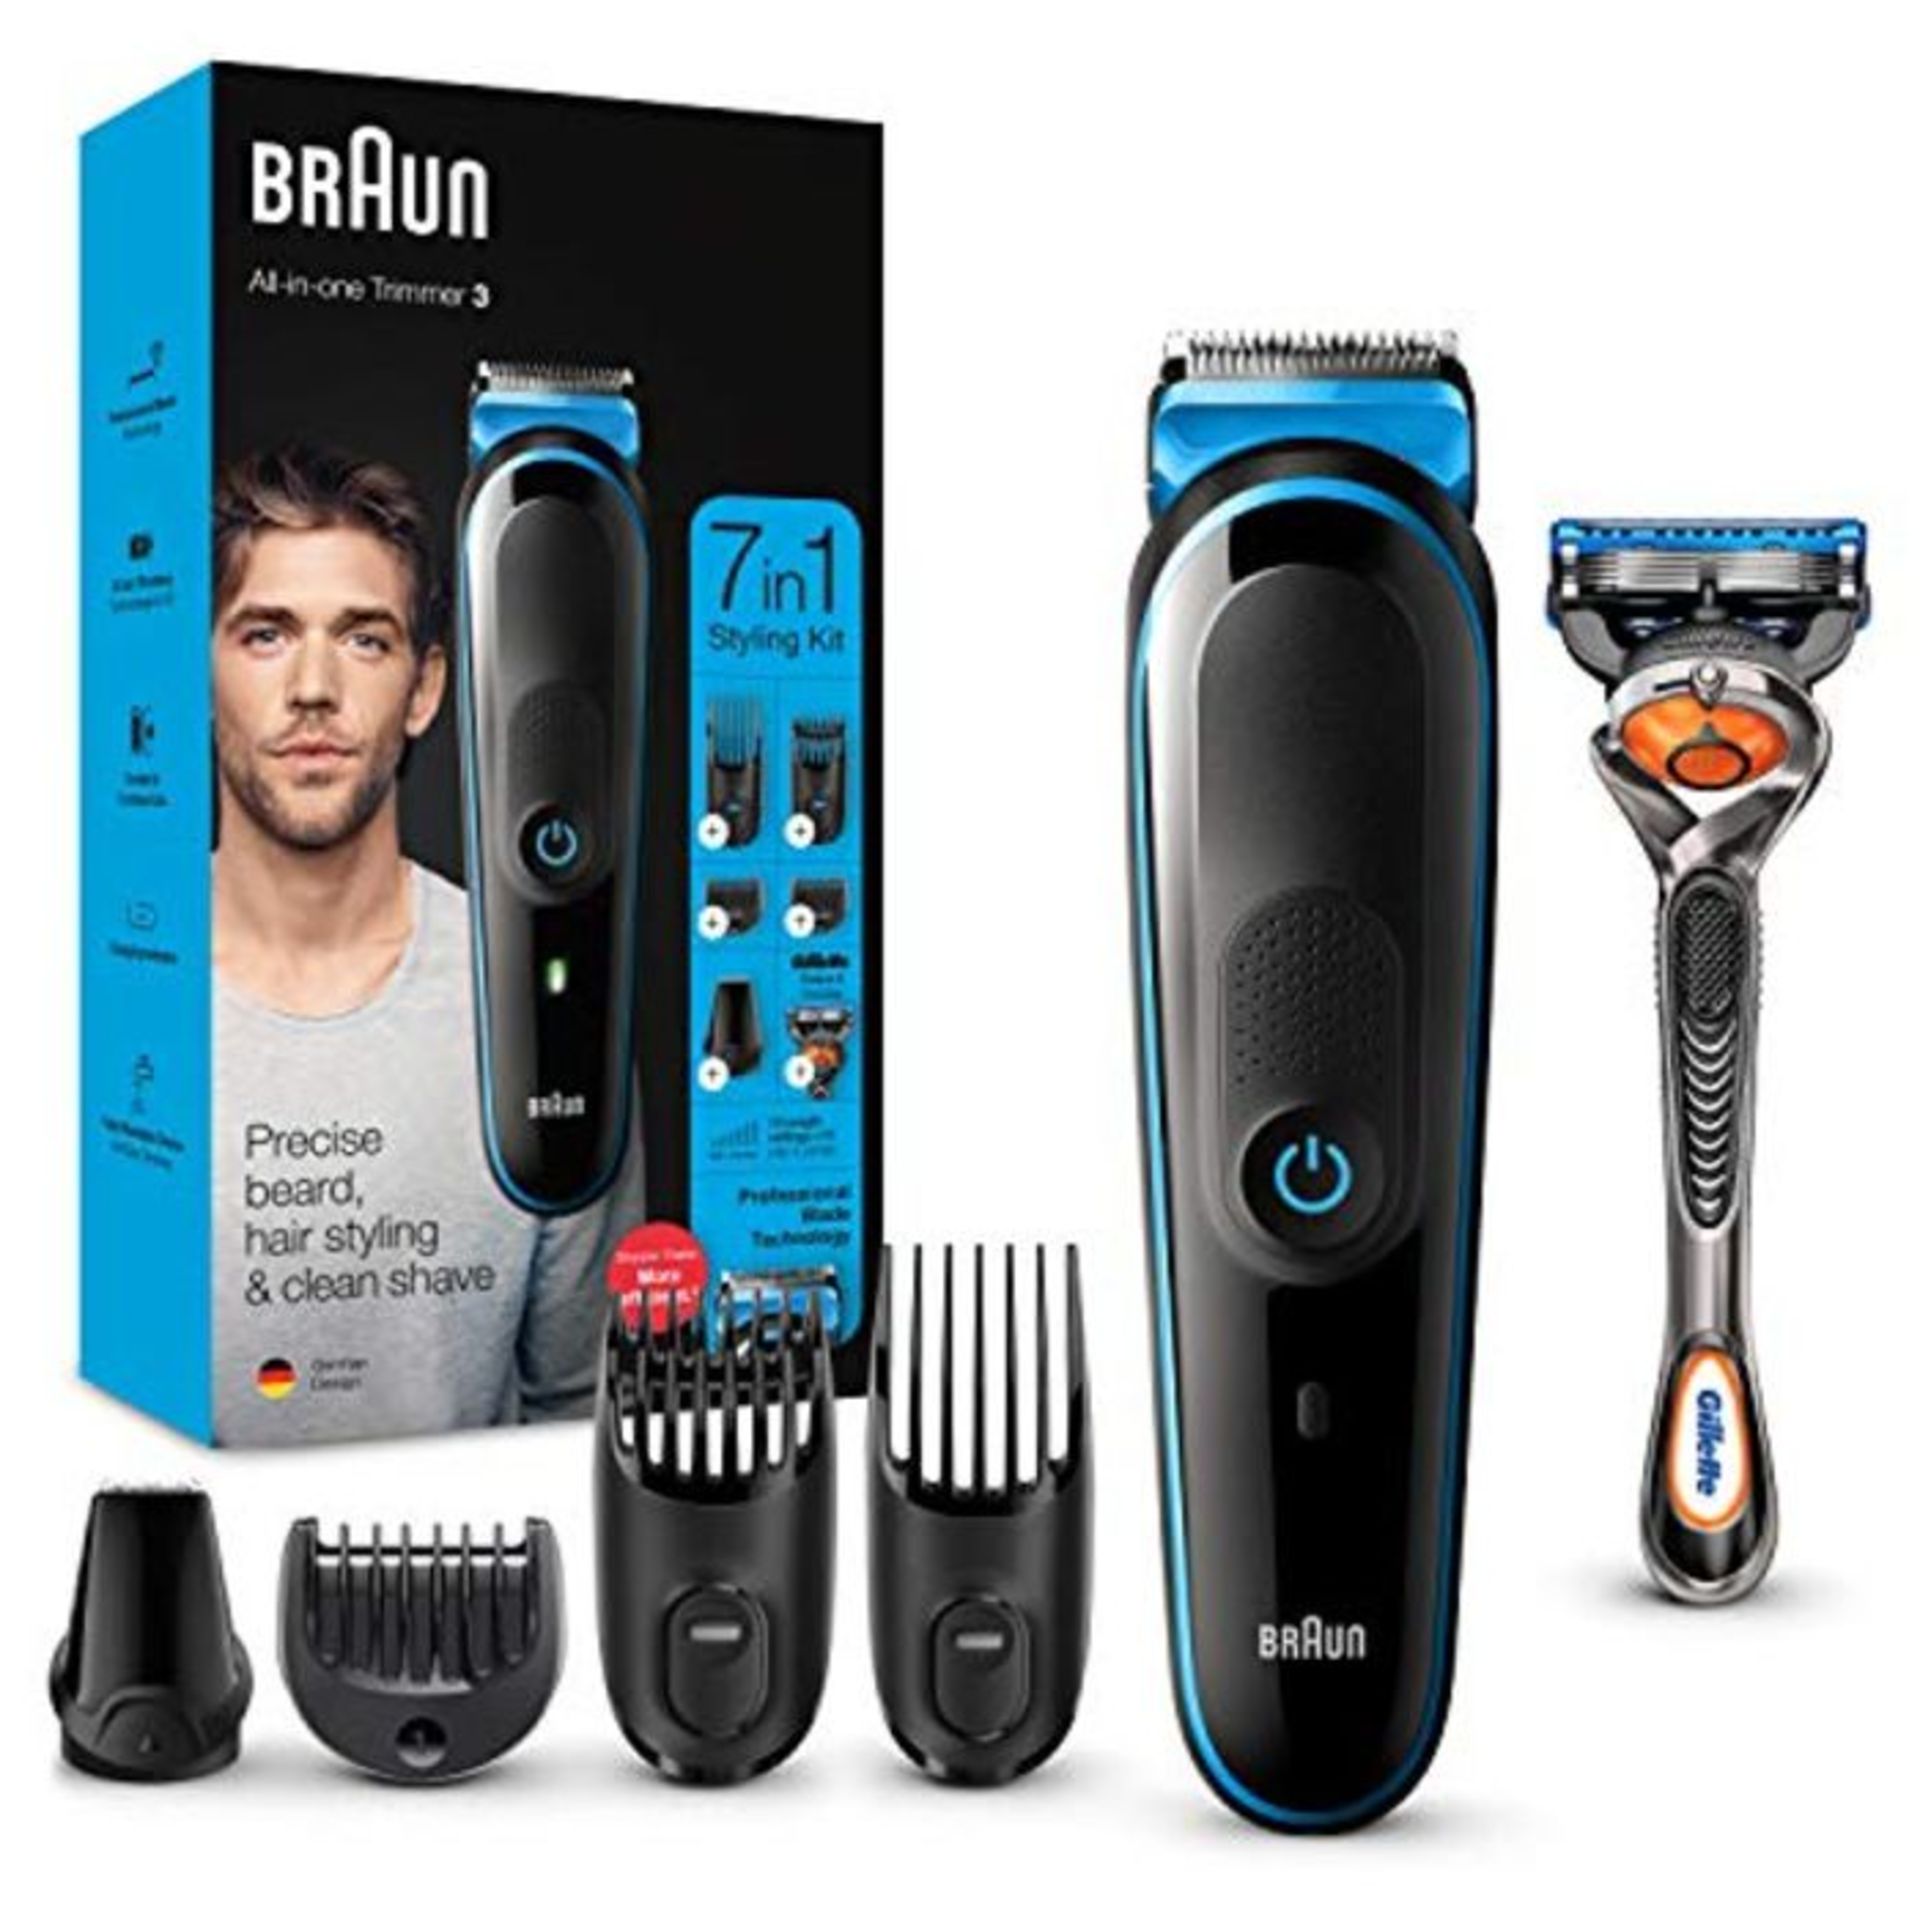 Braun 7-in-1 All-in-one Trimmer 3 MGK3245, Beard Trimmer for Men, Hair Clipper and Fac